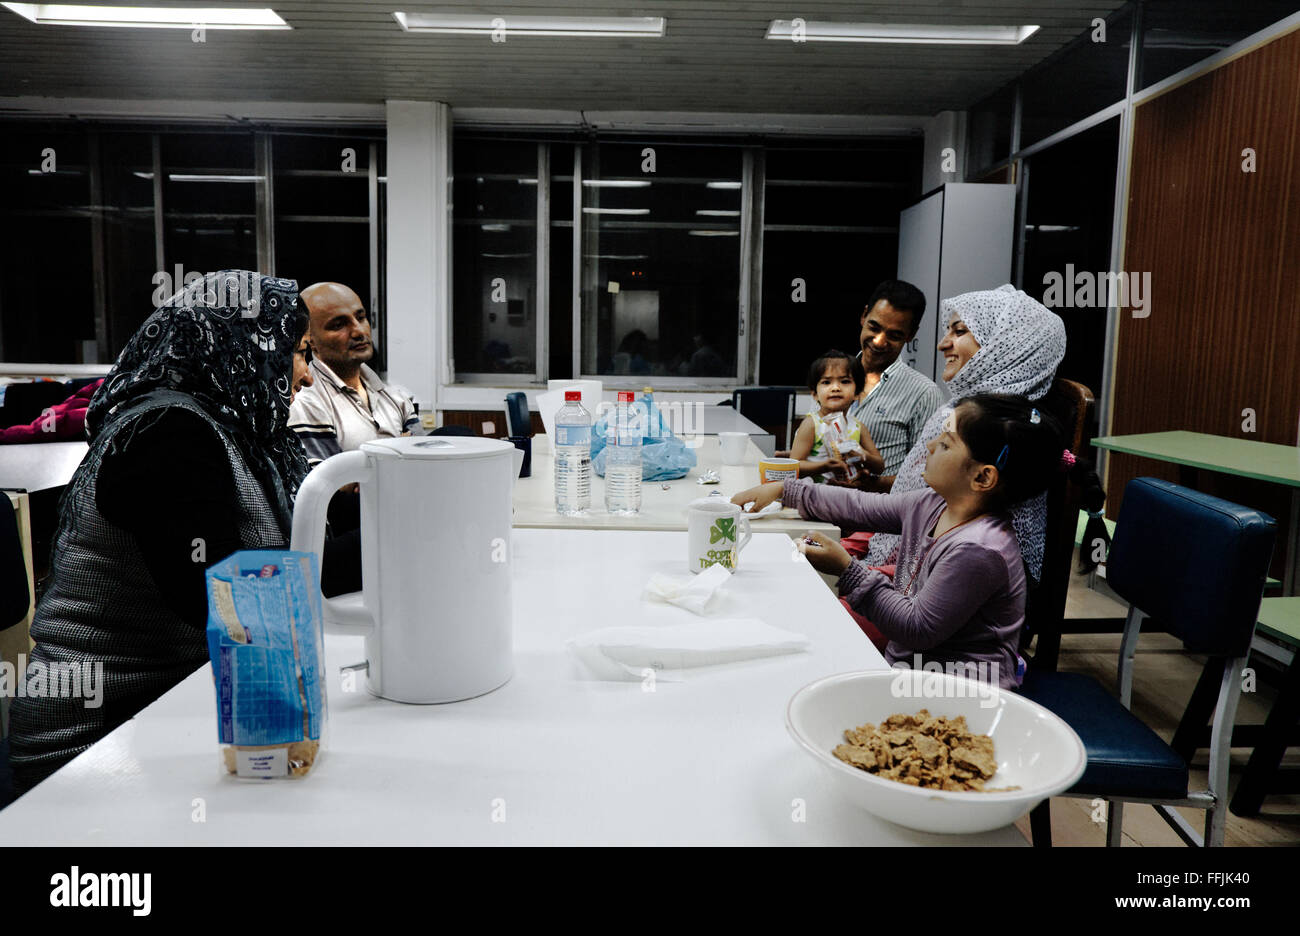 07/10/2015  -  Greece / Athens  -  Refugees have a late snack in the dining room of Notara 26. Stock Photo